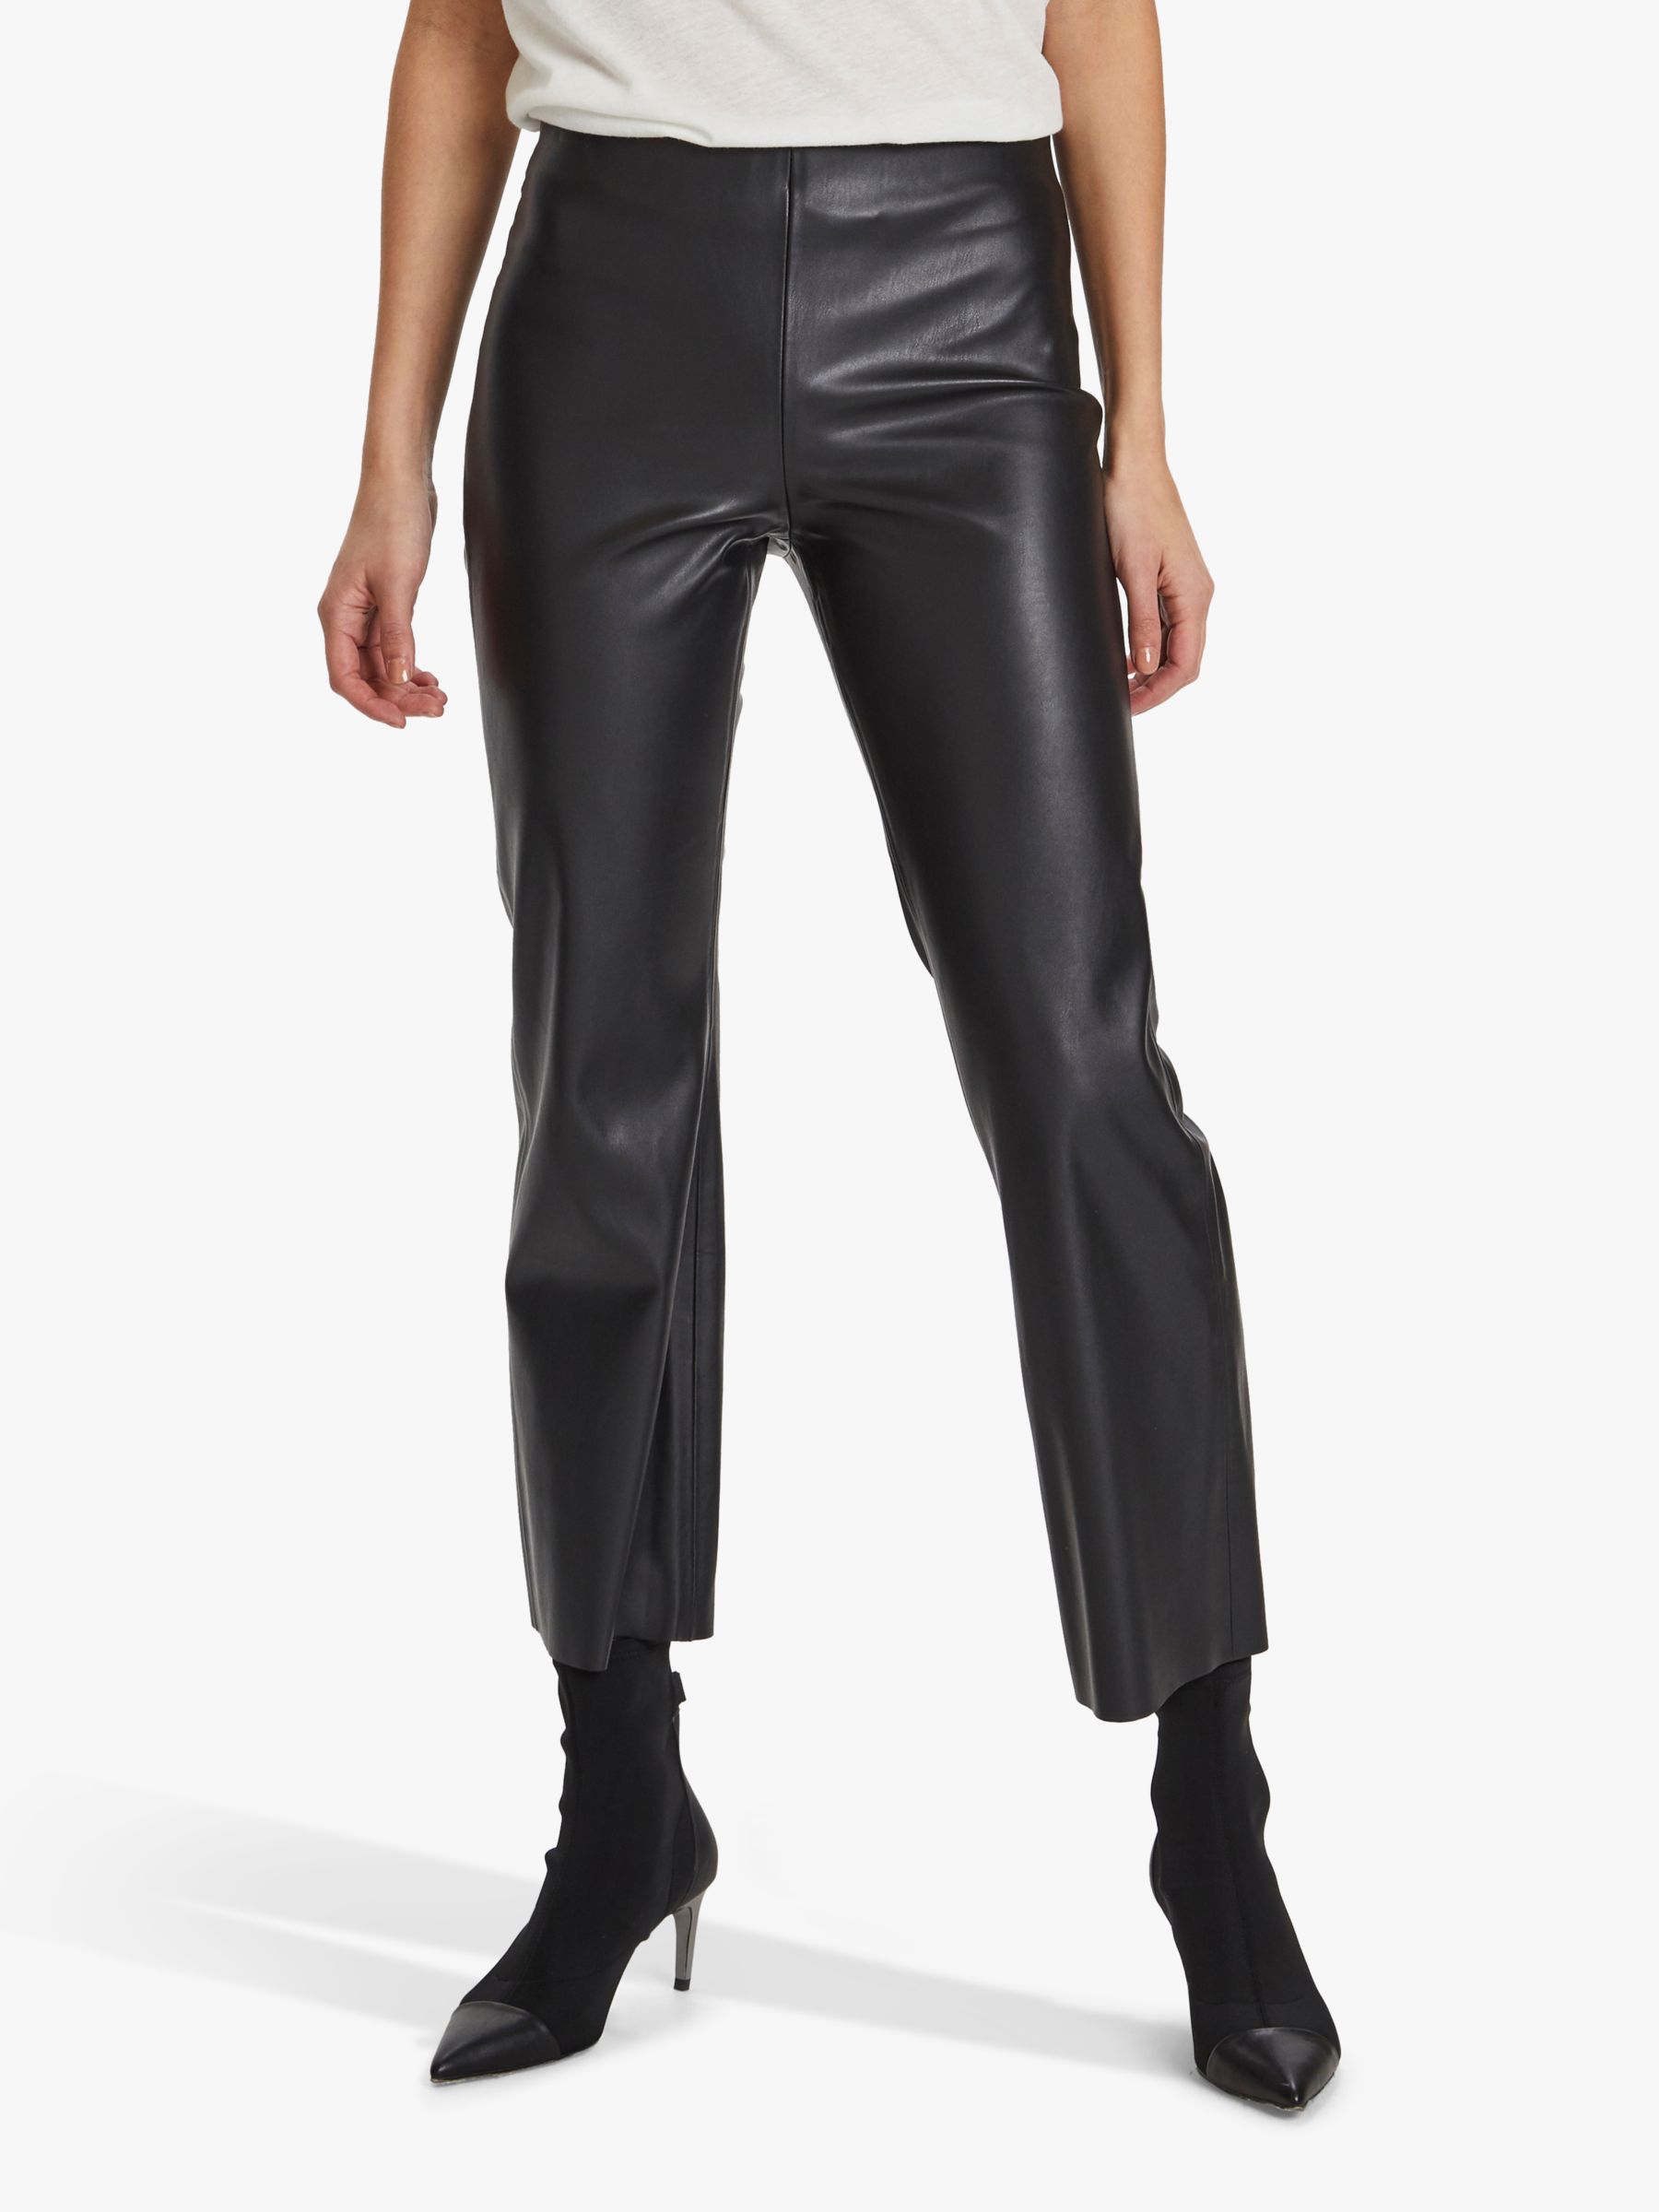 Soaked In Luxury Kaylee Faux Leather Kick Flare Trousers, Black, XS